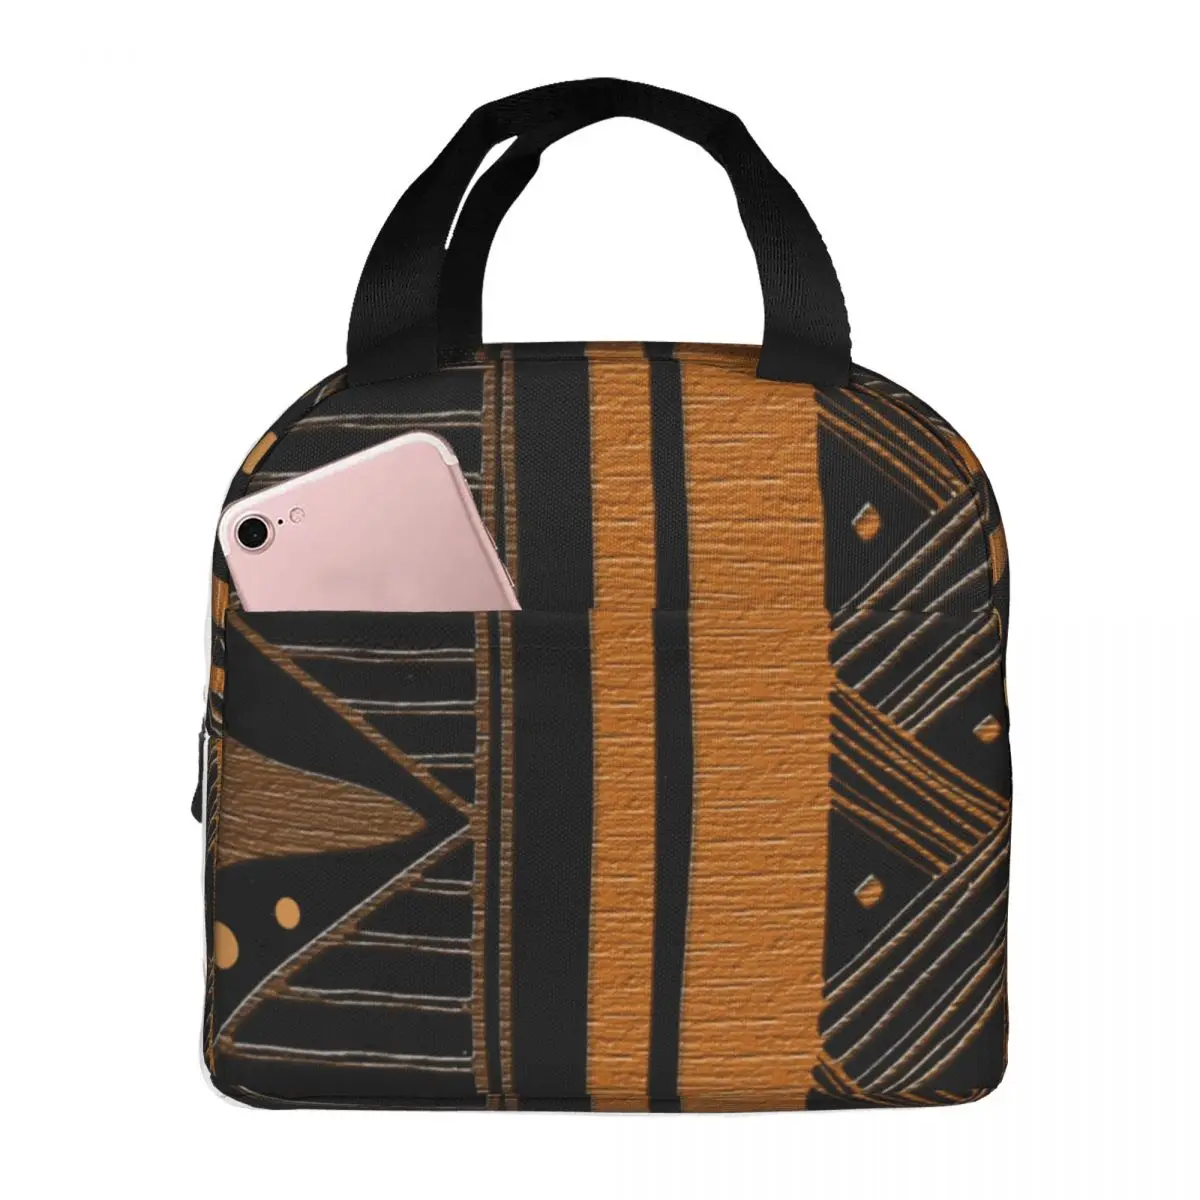 African Design Lunch Bag Waterproof Insulated Canvas Cooler Bag Ancient Thermal Food Picnic Travel Tote for Women Girl